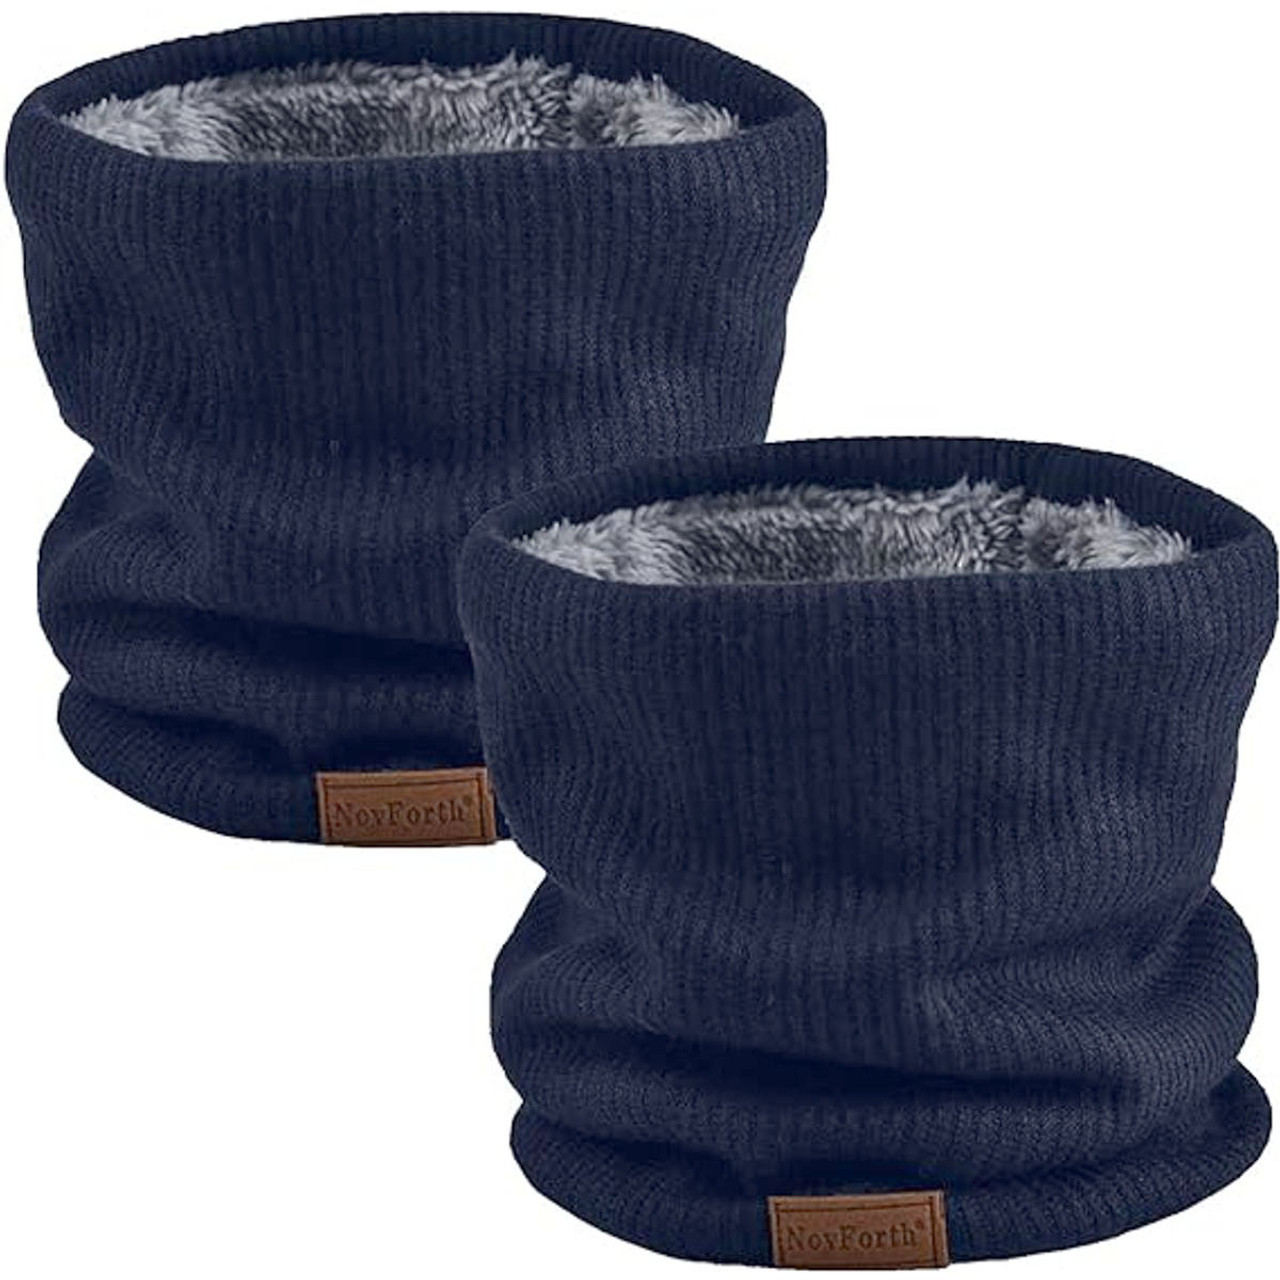 NovForth® Thick Fleece-Lined Winter-Warm Neck Gaiter (1- or 2-Pack) product image